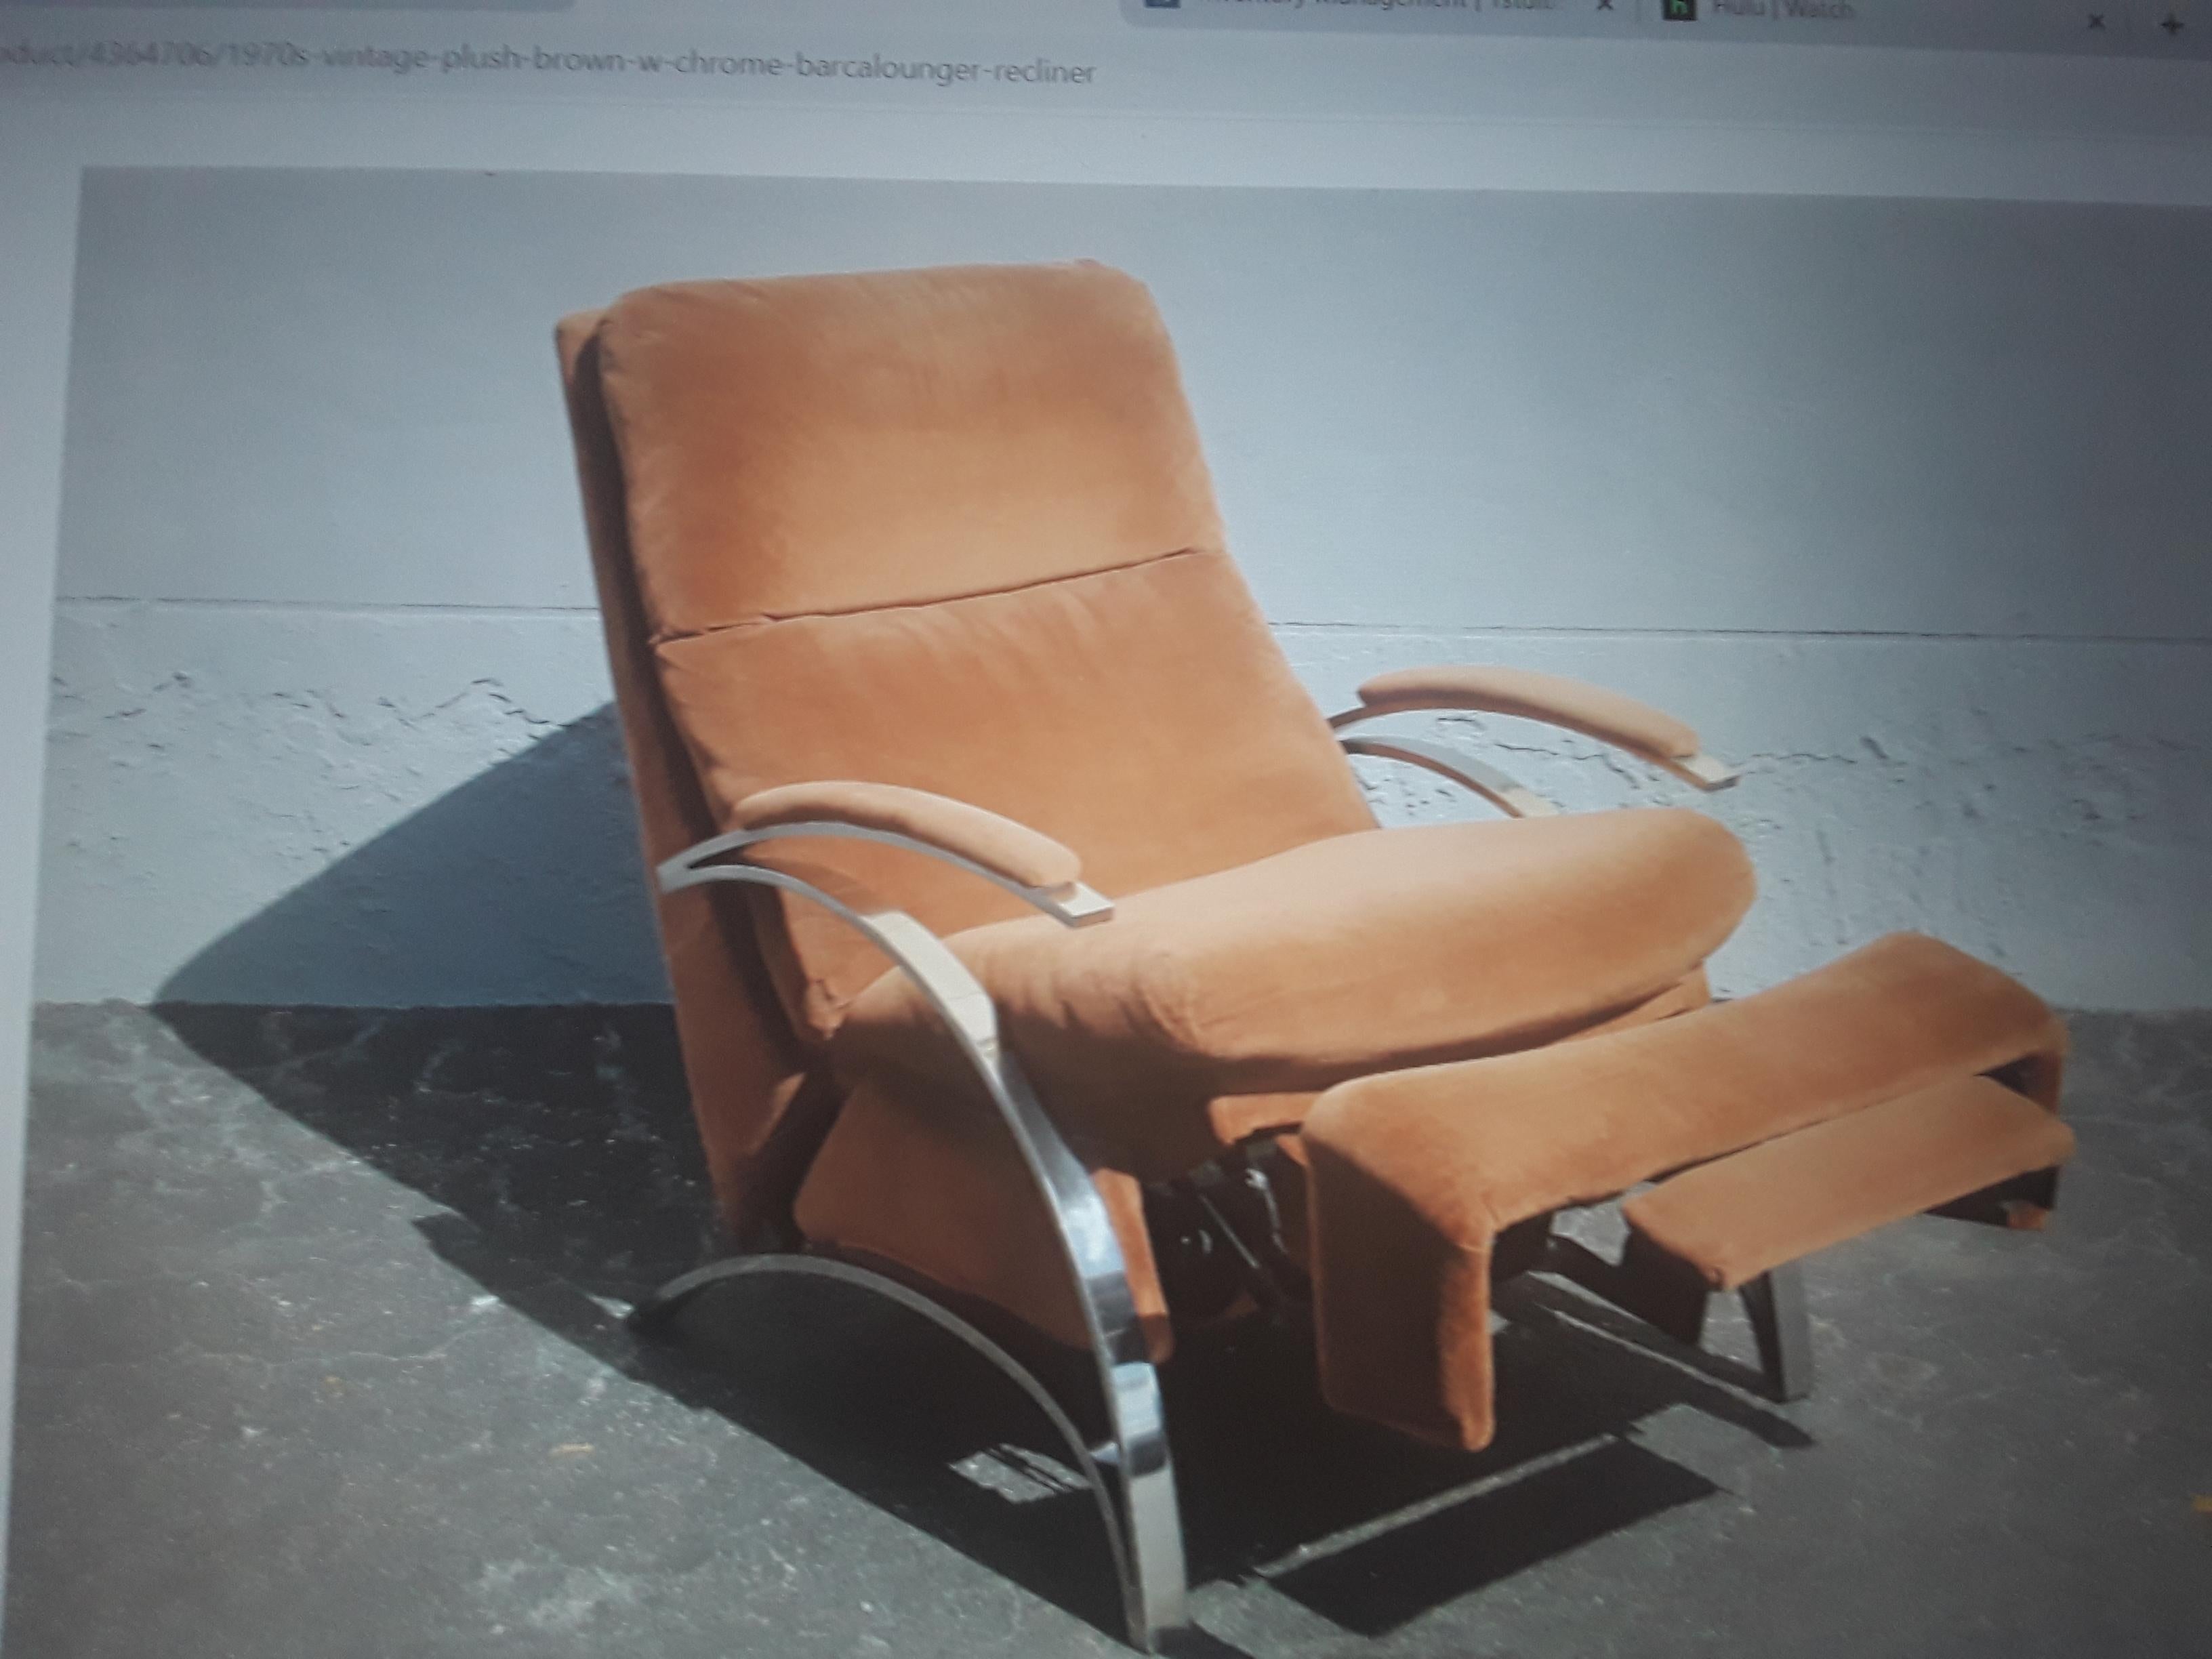 1970's Modern Plush Brown w/ Chrome Barcalounger Recliner/ Lounge Chair For Sale 7